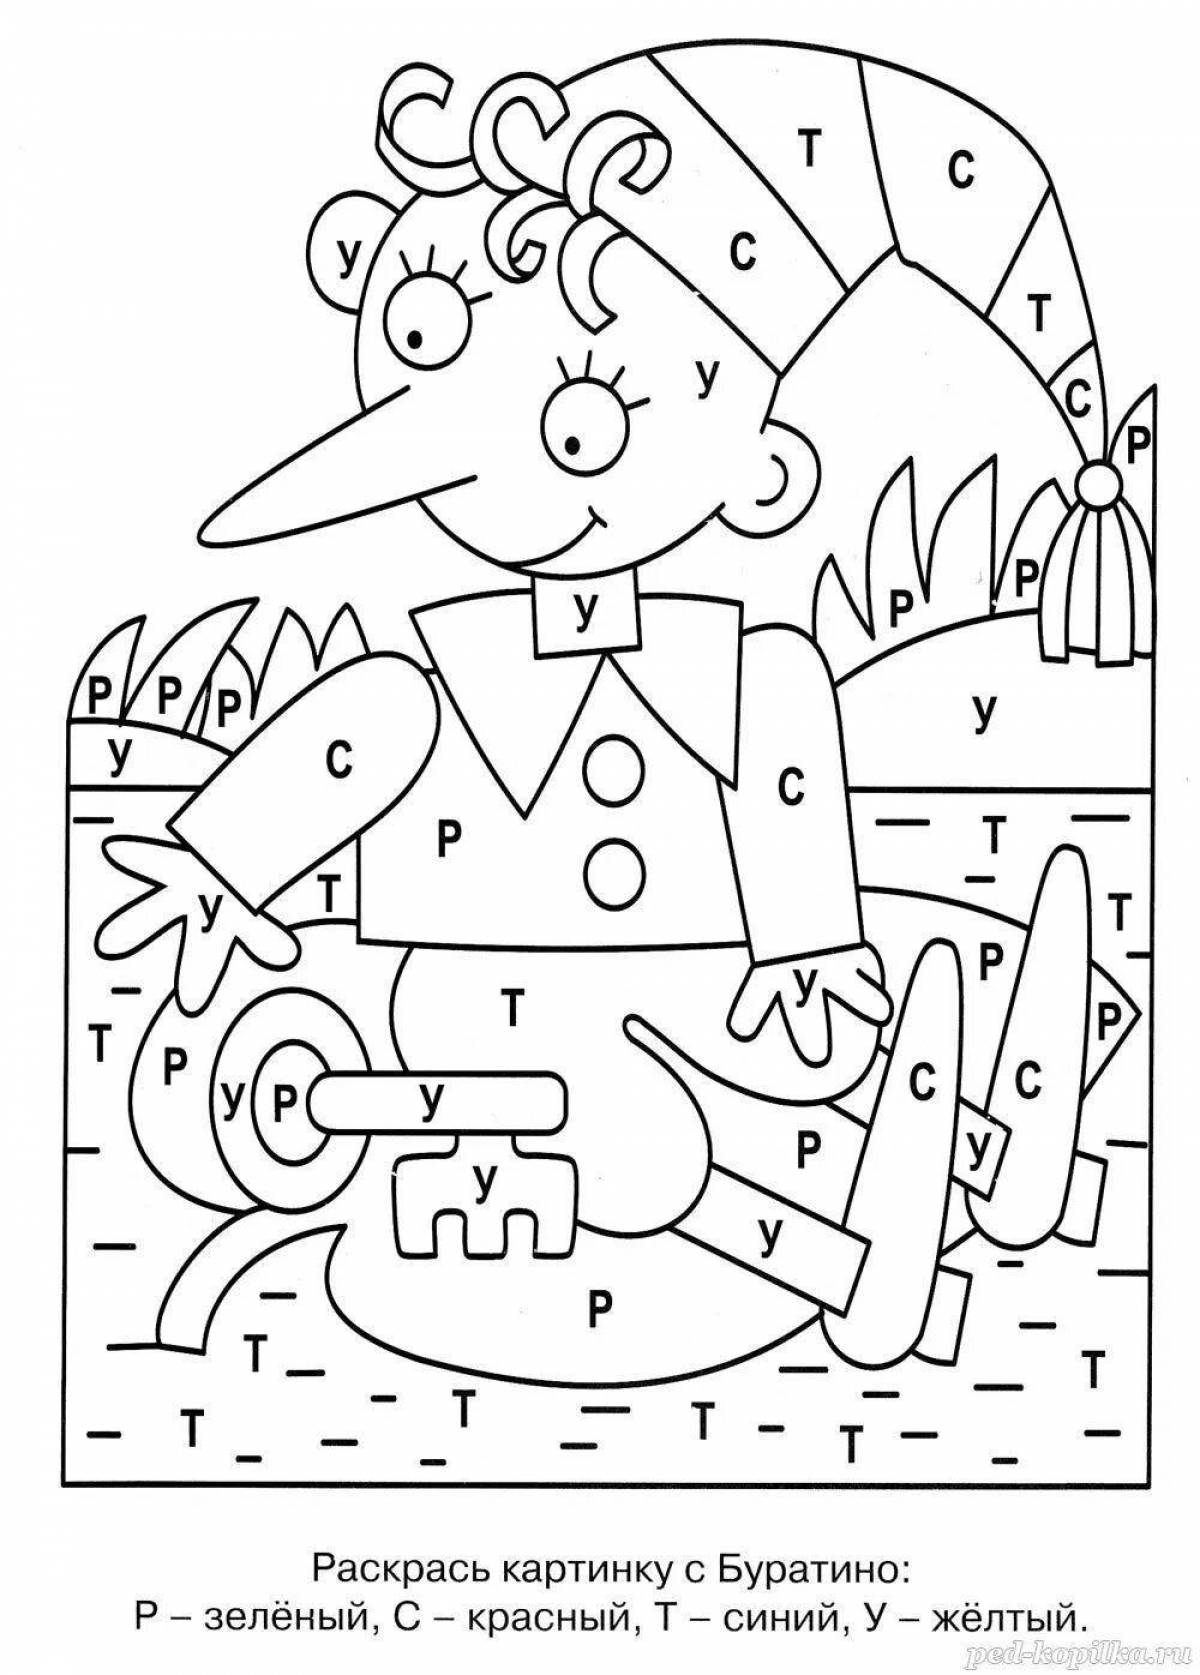 Colourful selection of coloring pages for preschoolers 6-7 years old